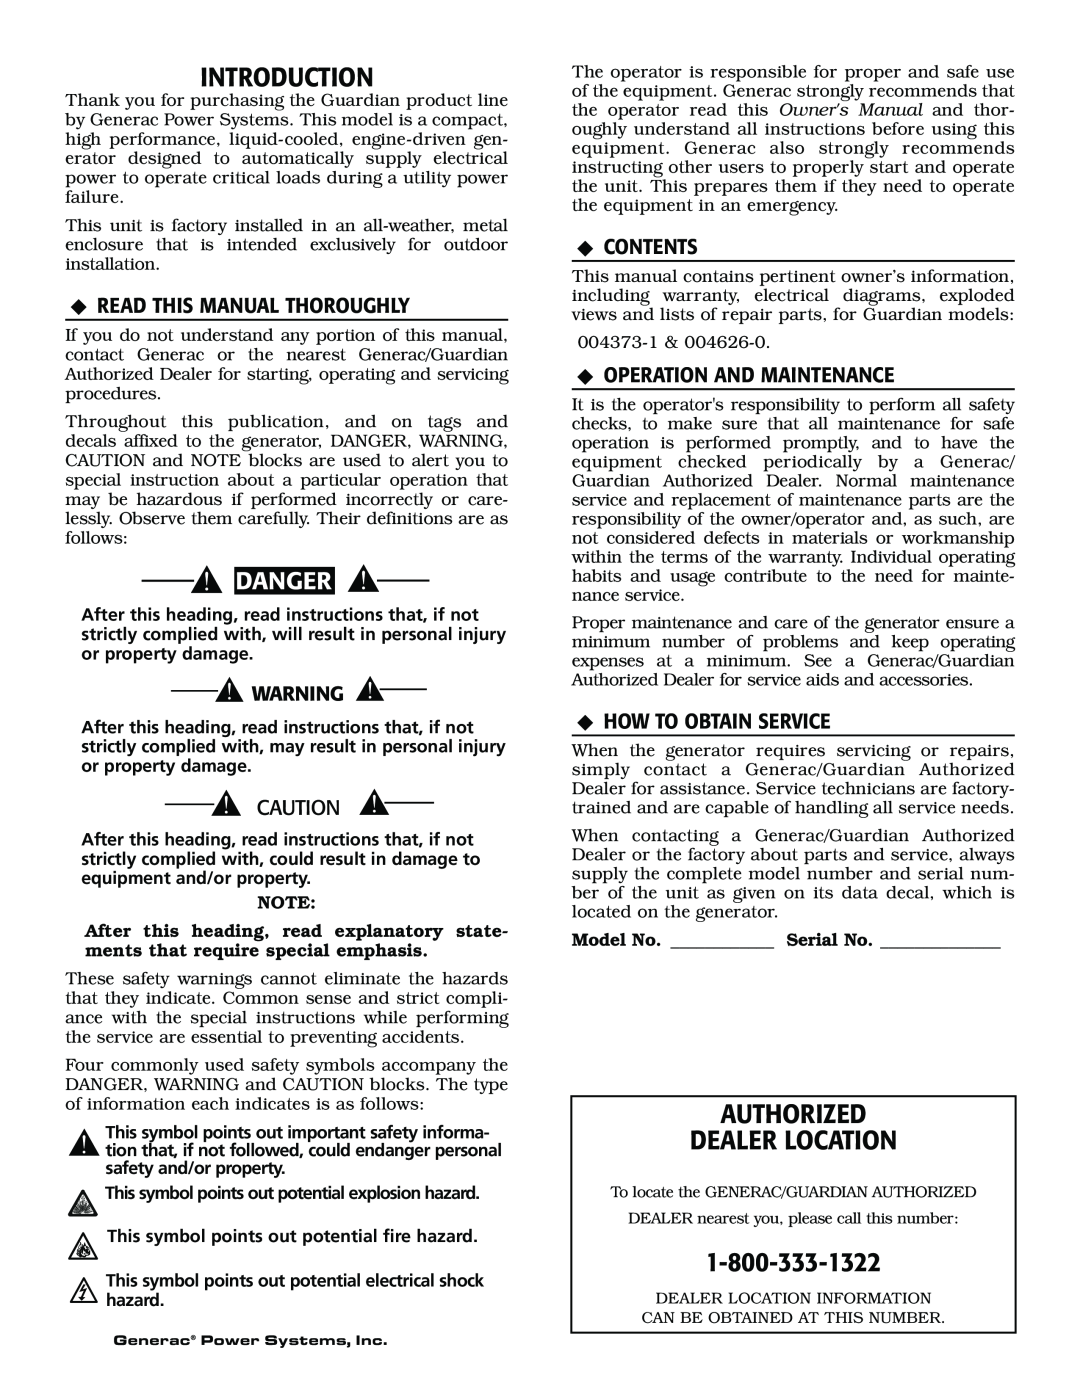 Generac 004373-2, 004626-1 Introduction, Authorized Dealer Location, Danger, Read This Manual Thoroughly, Contents 